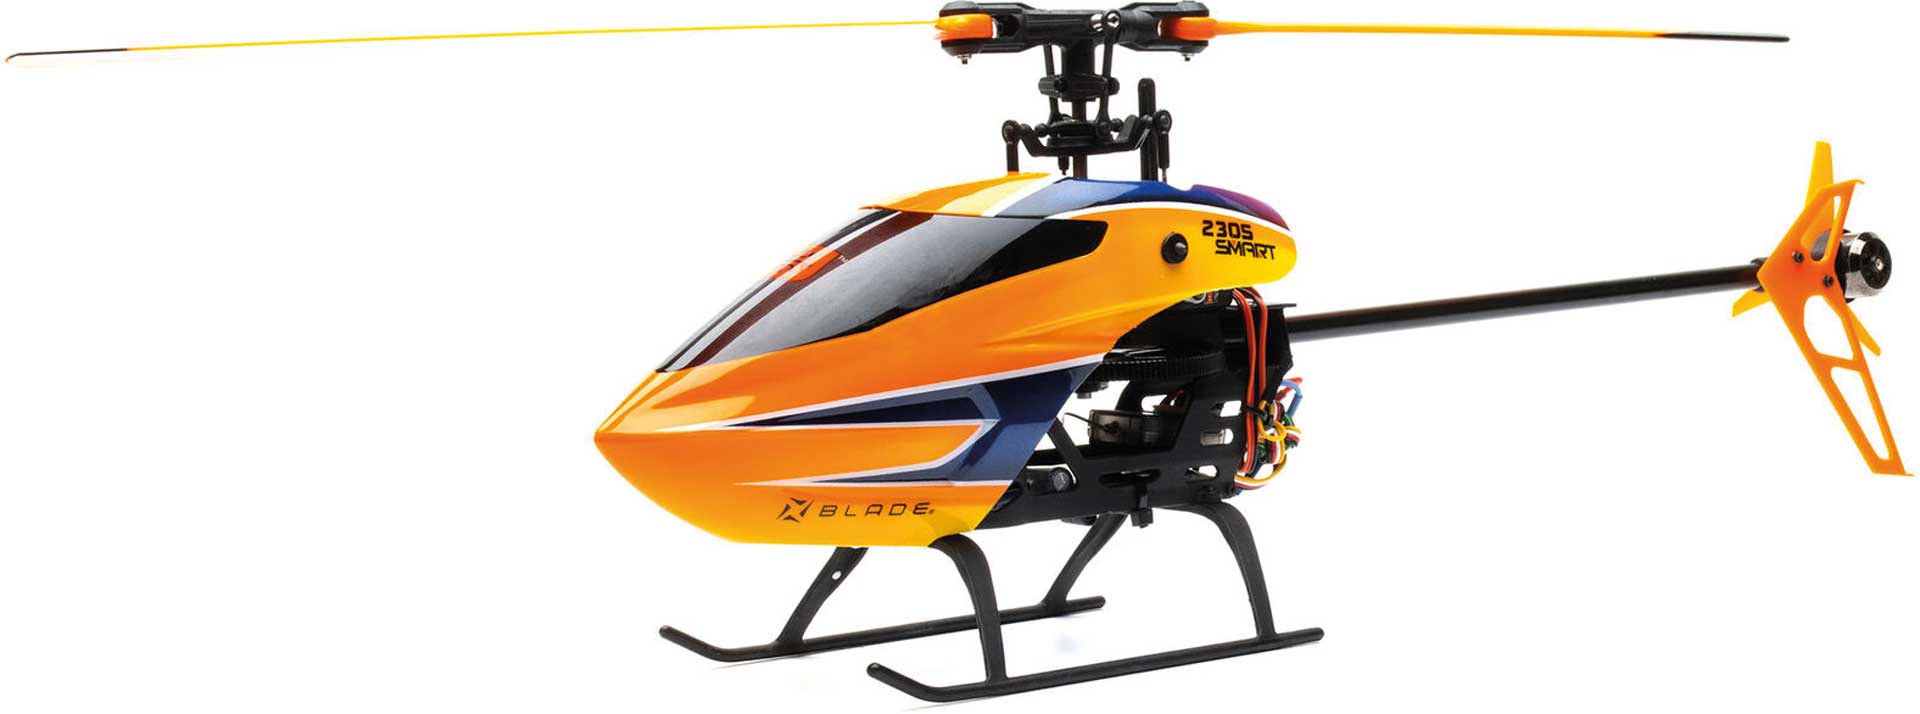 BLADE 230 S RTF Basic Helicopters